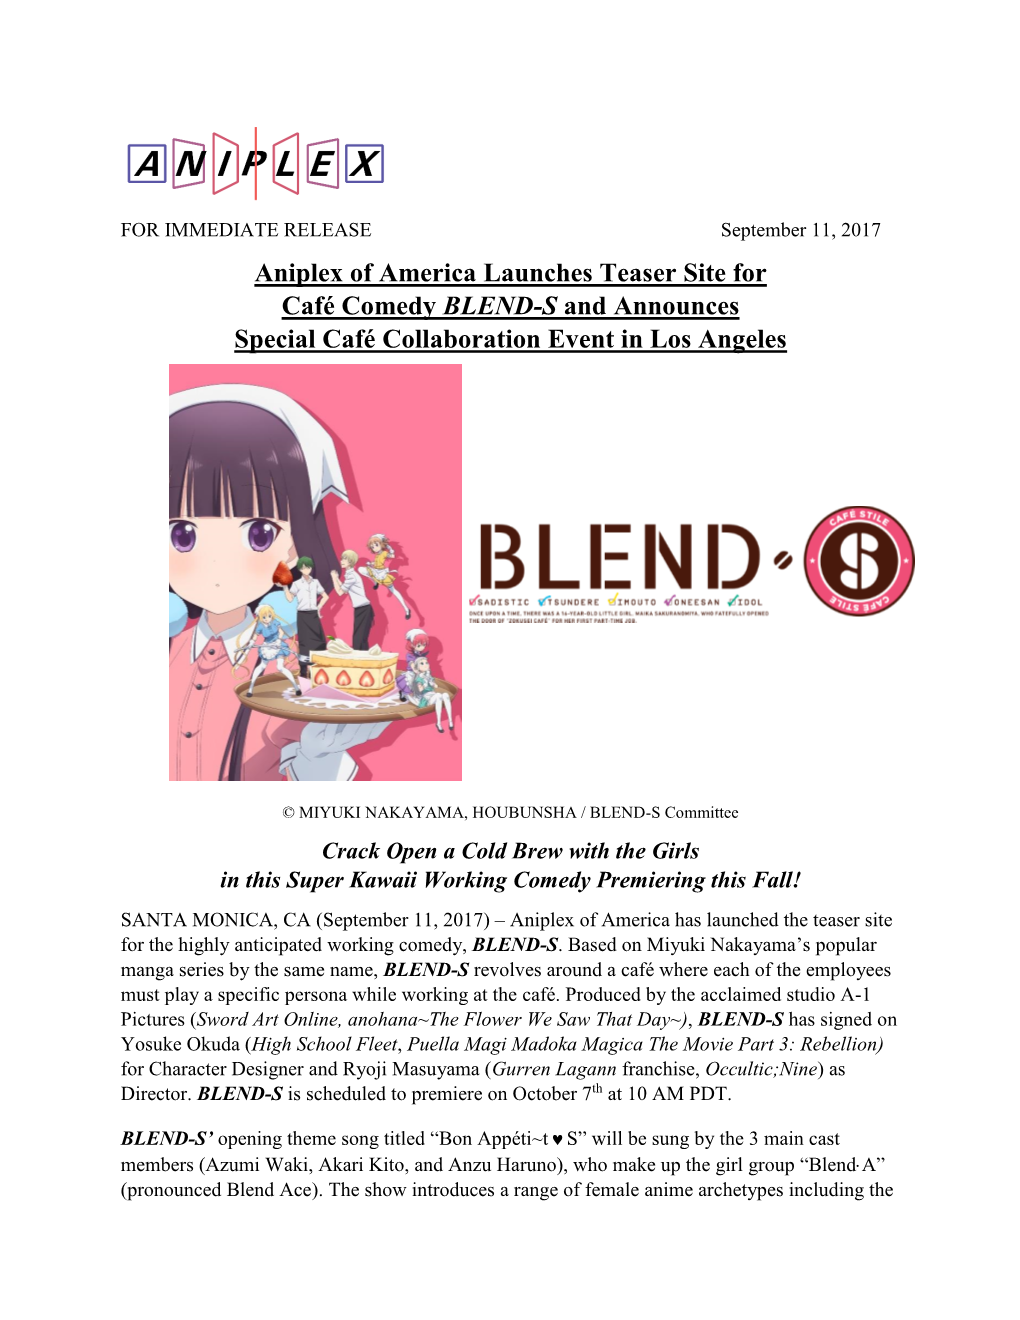 Aniplex of America Launches Teaser Site for Café Comedy BLEND-S and Announces Special Café Collaboration Event in Los Angeles